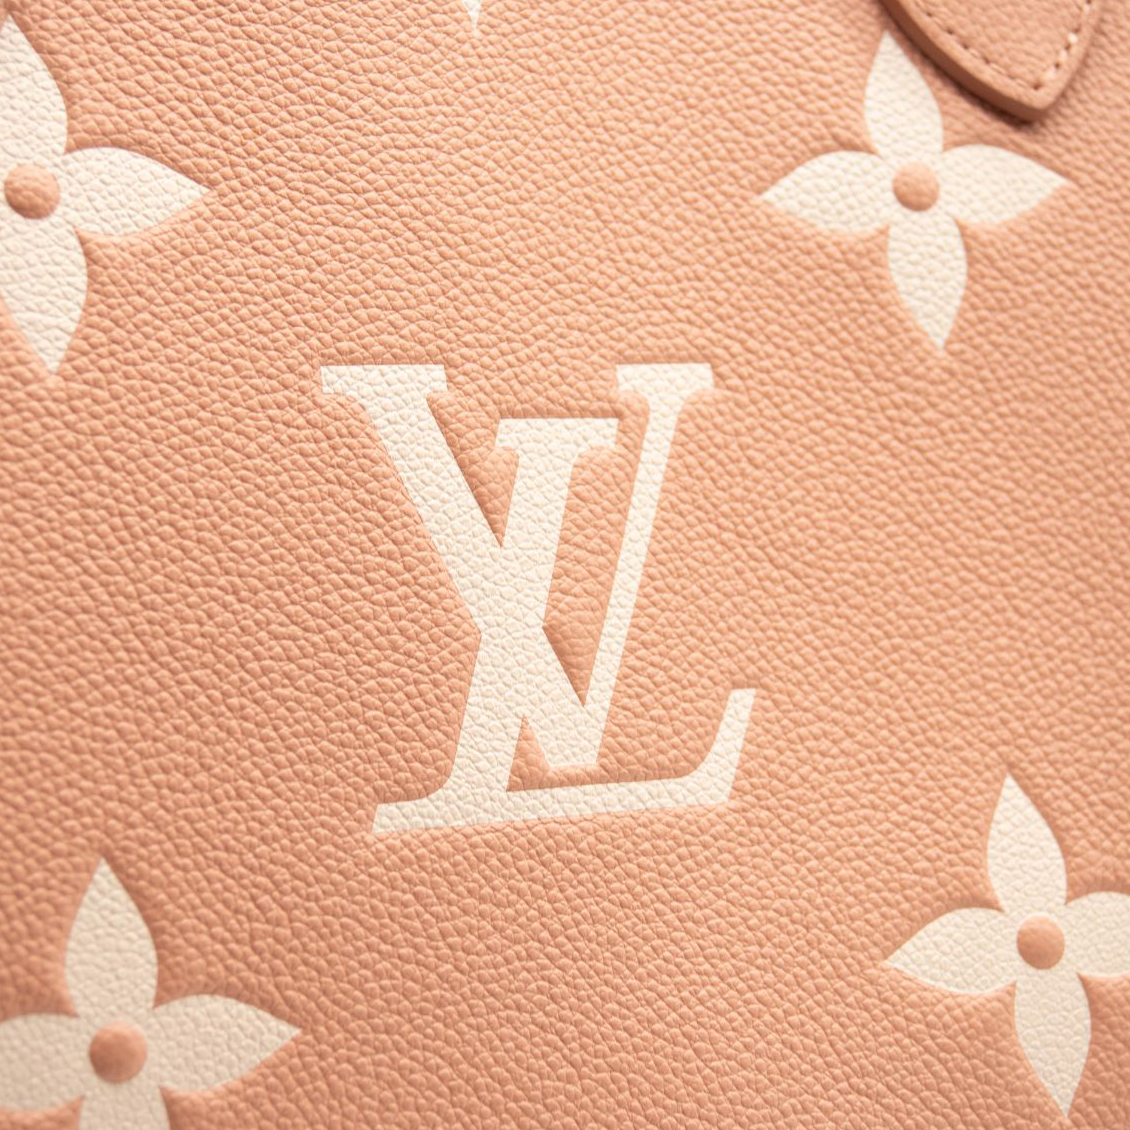 louis vuitton CREAM leather fabric with big patterns